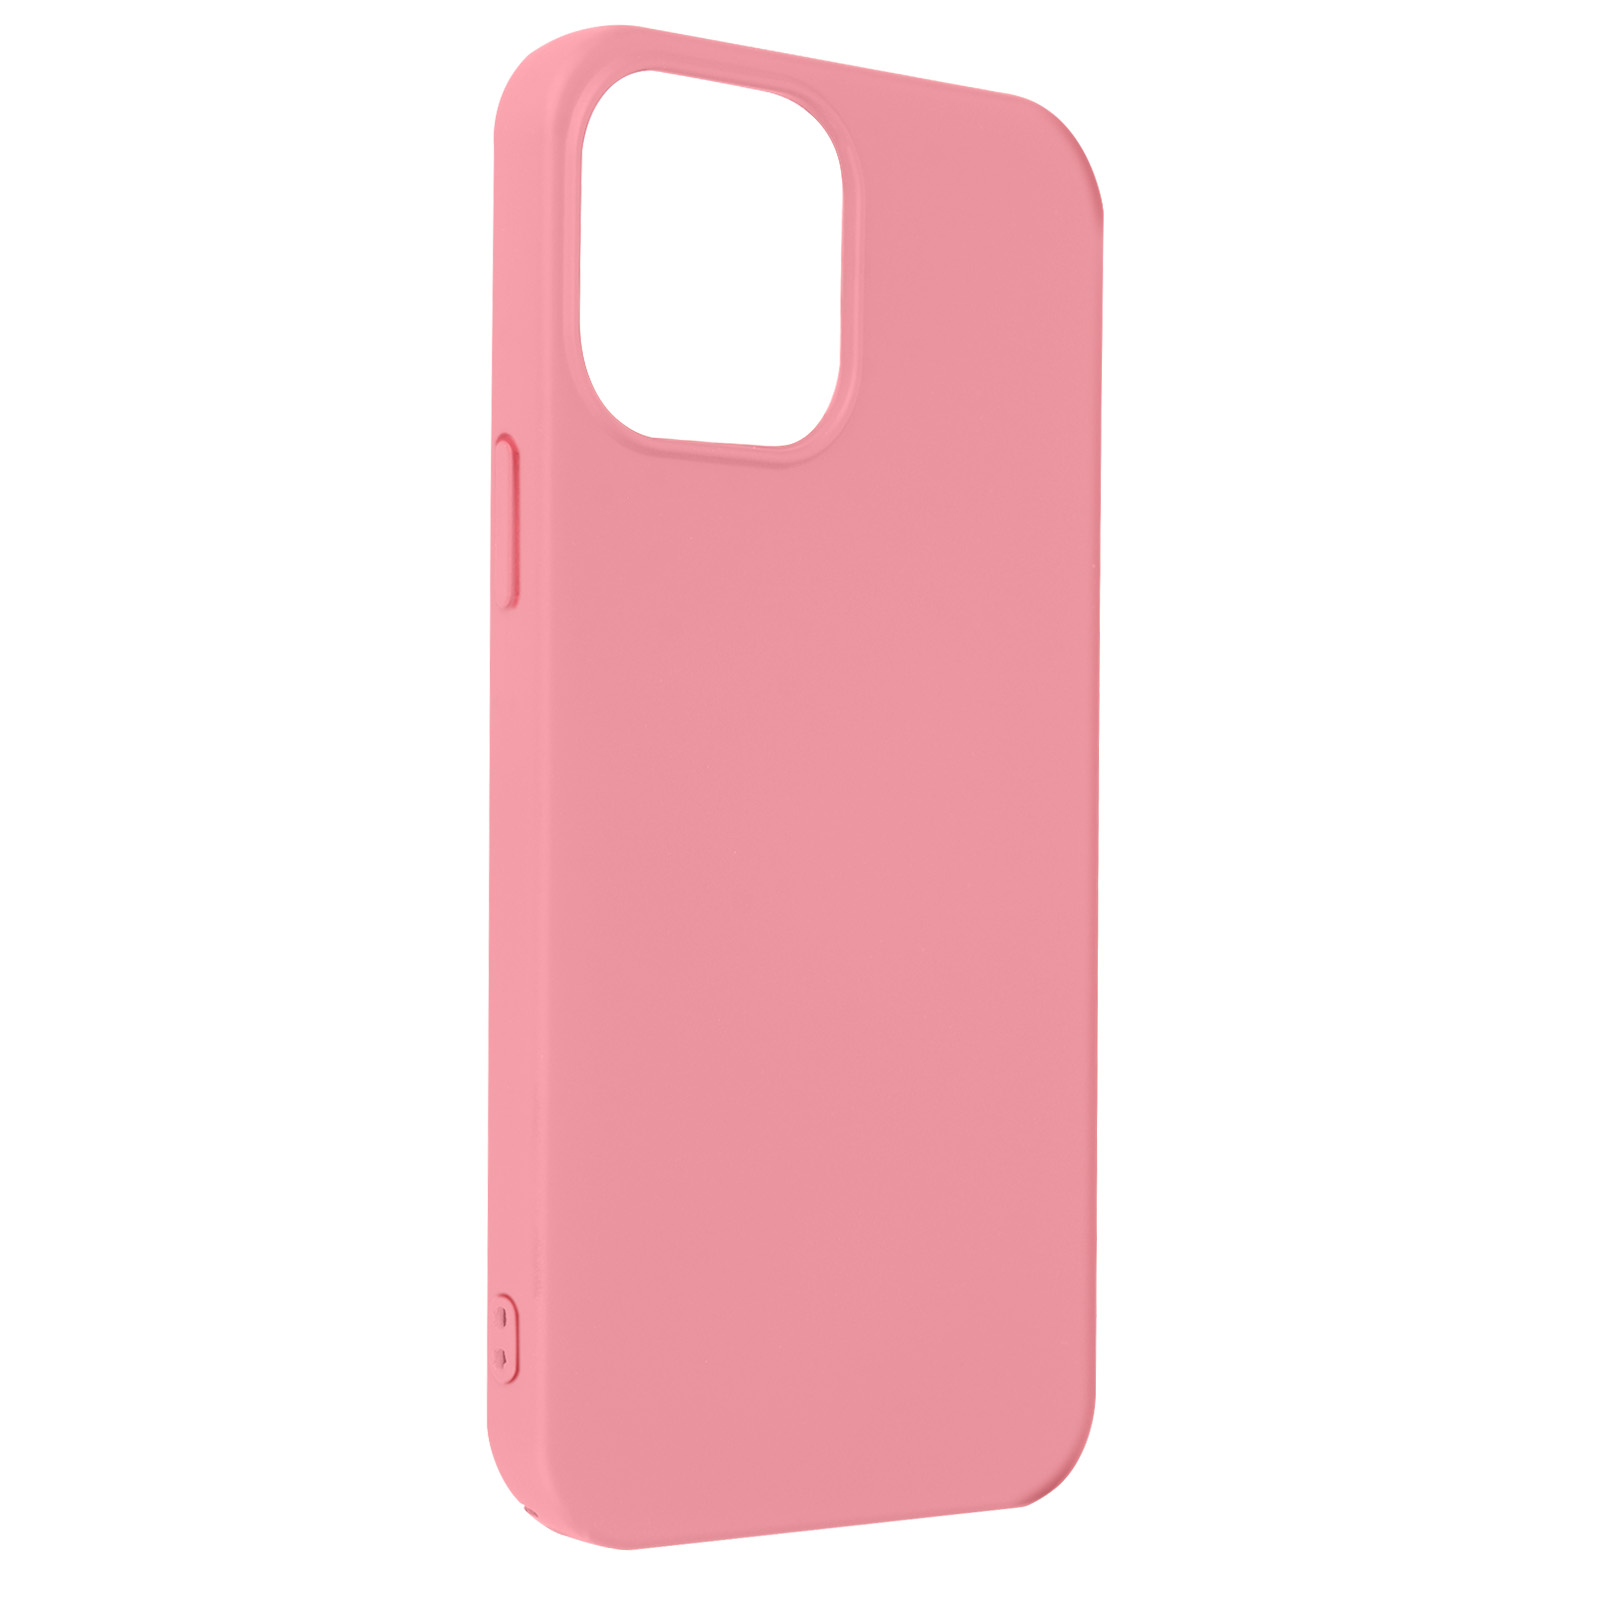 iPhone 13 Max, Backcover, Pro Apple, AVIZAR Rosa Fast Series,